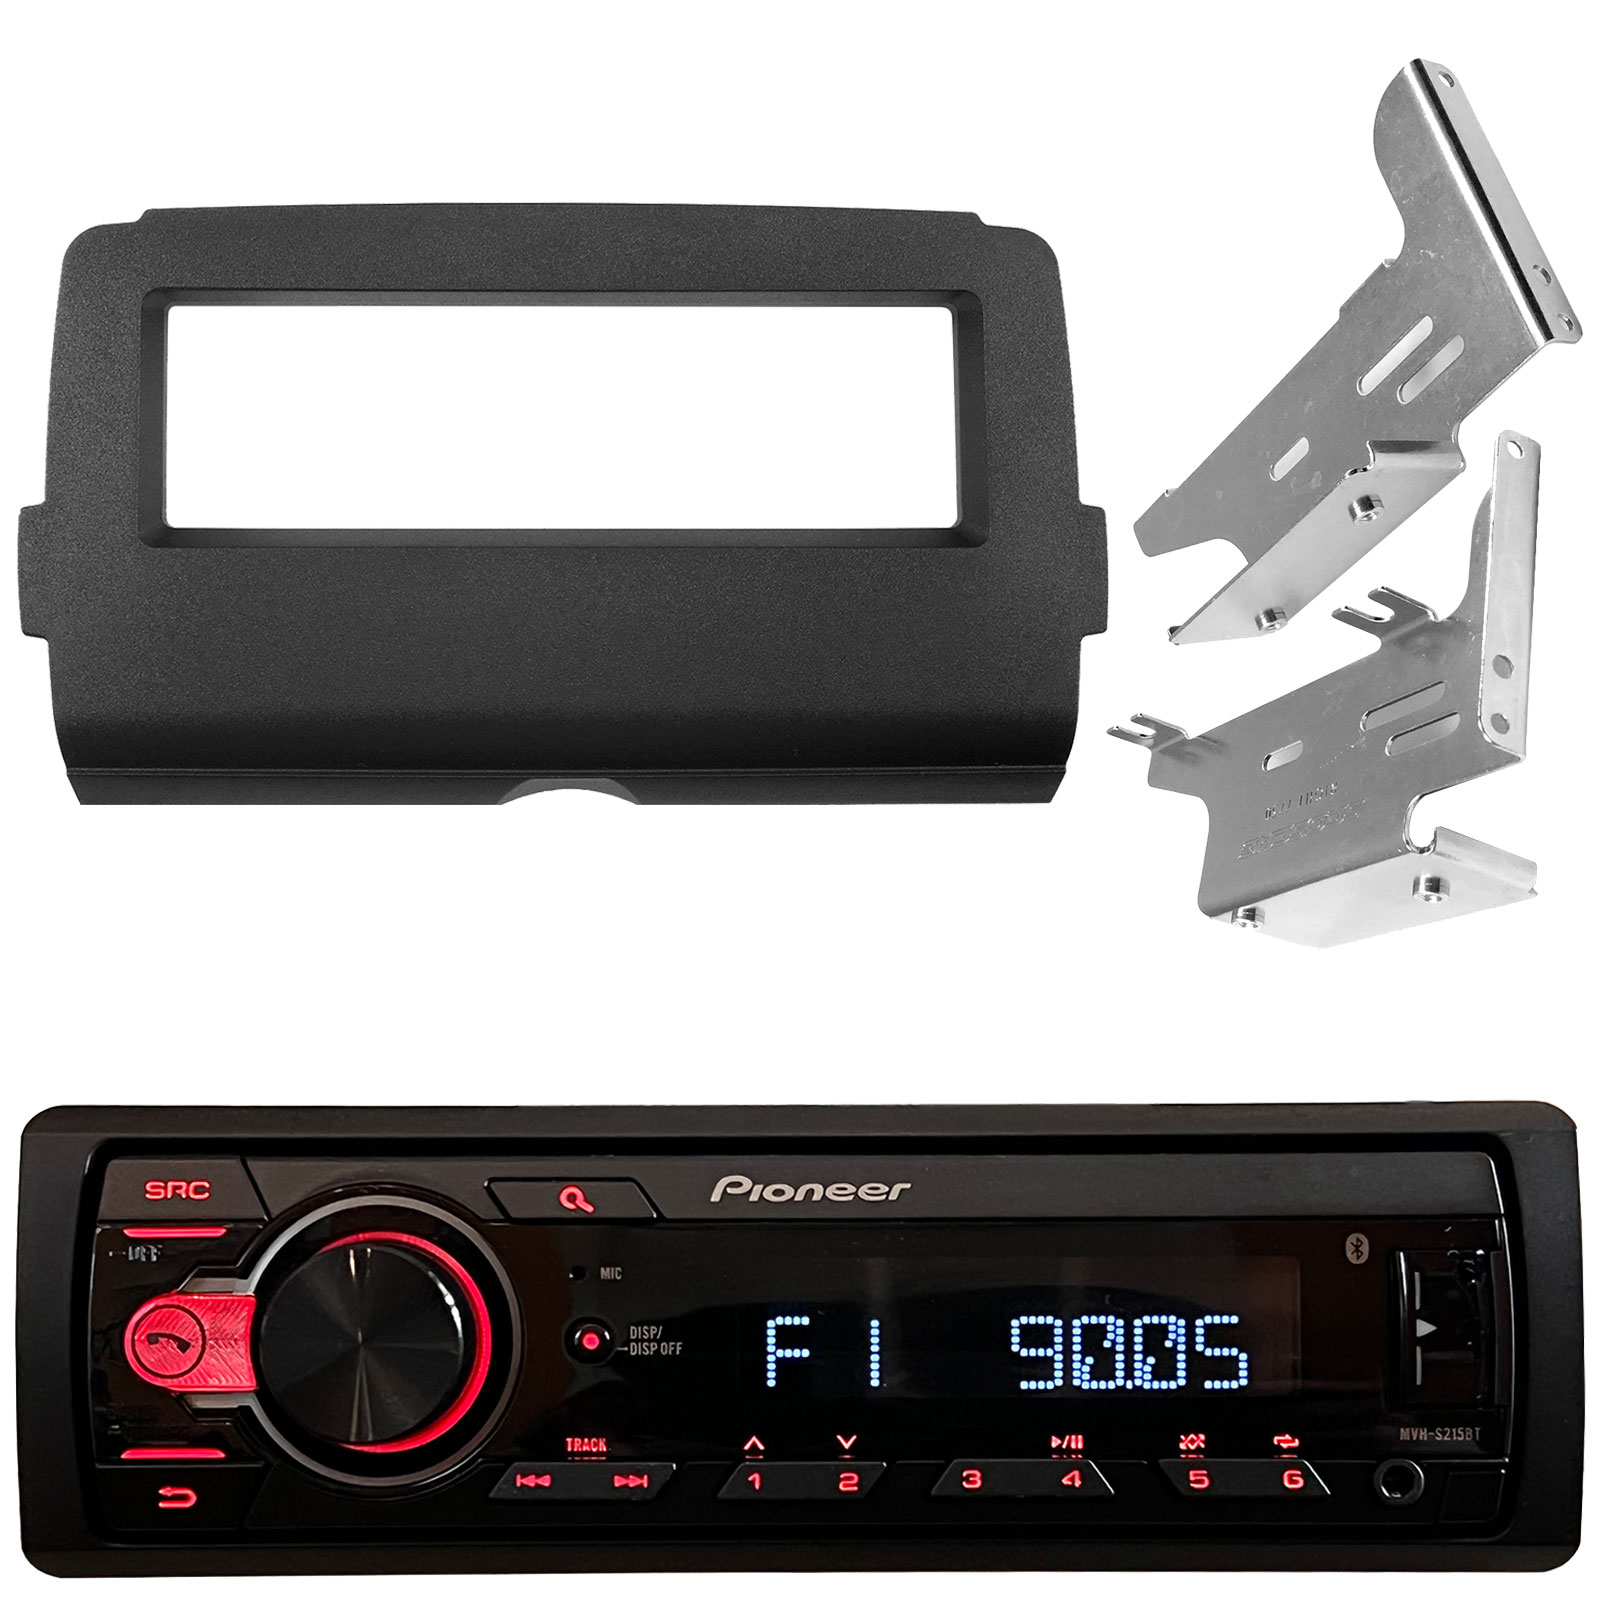  Pioneer MVH-S215BT Digital Media Car Stereo Receiver Single DIN  Bluetooth in-Dash USB MP3 Auxiliary AM/FM Android Smartphone Compatible, :  Electronics